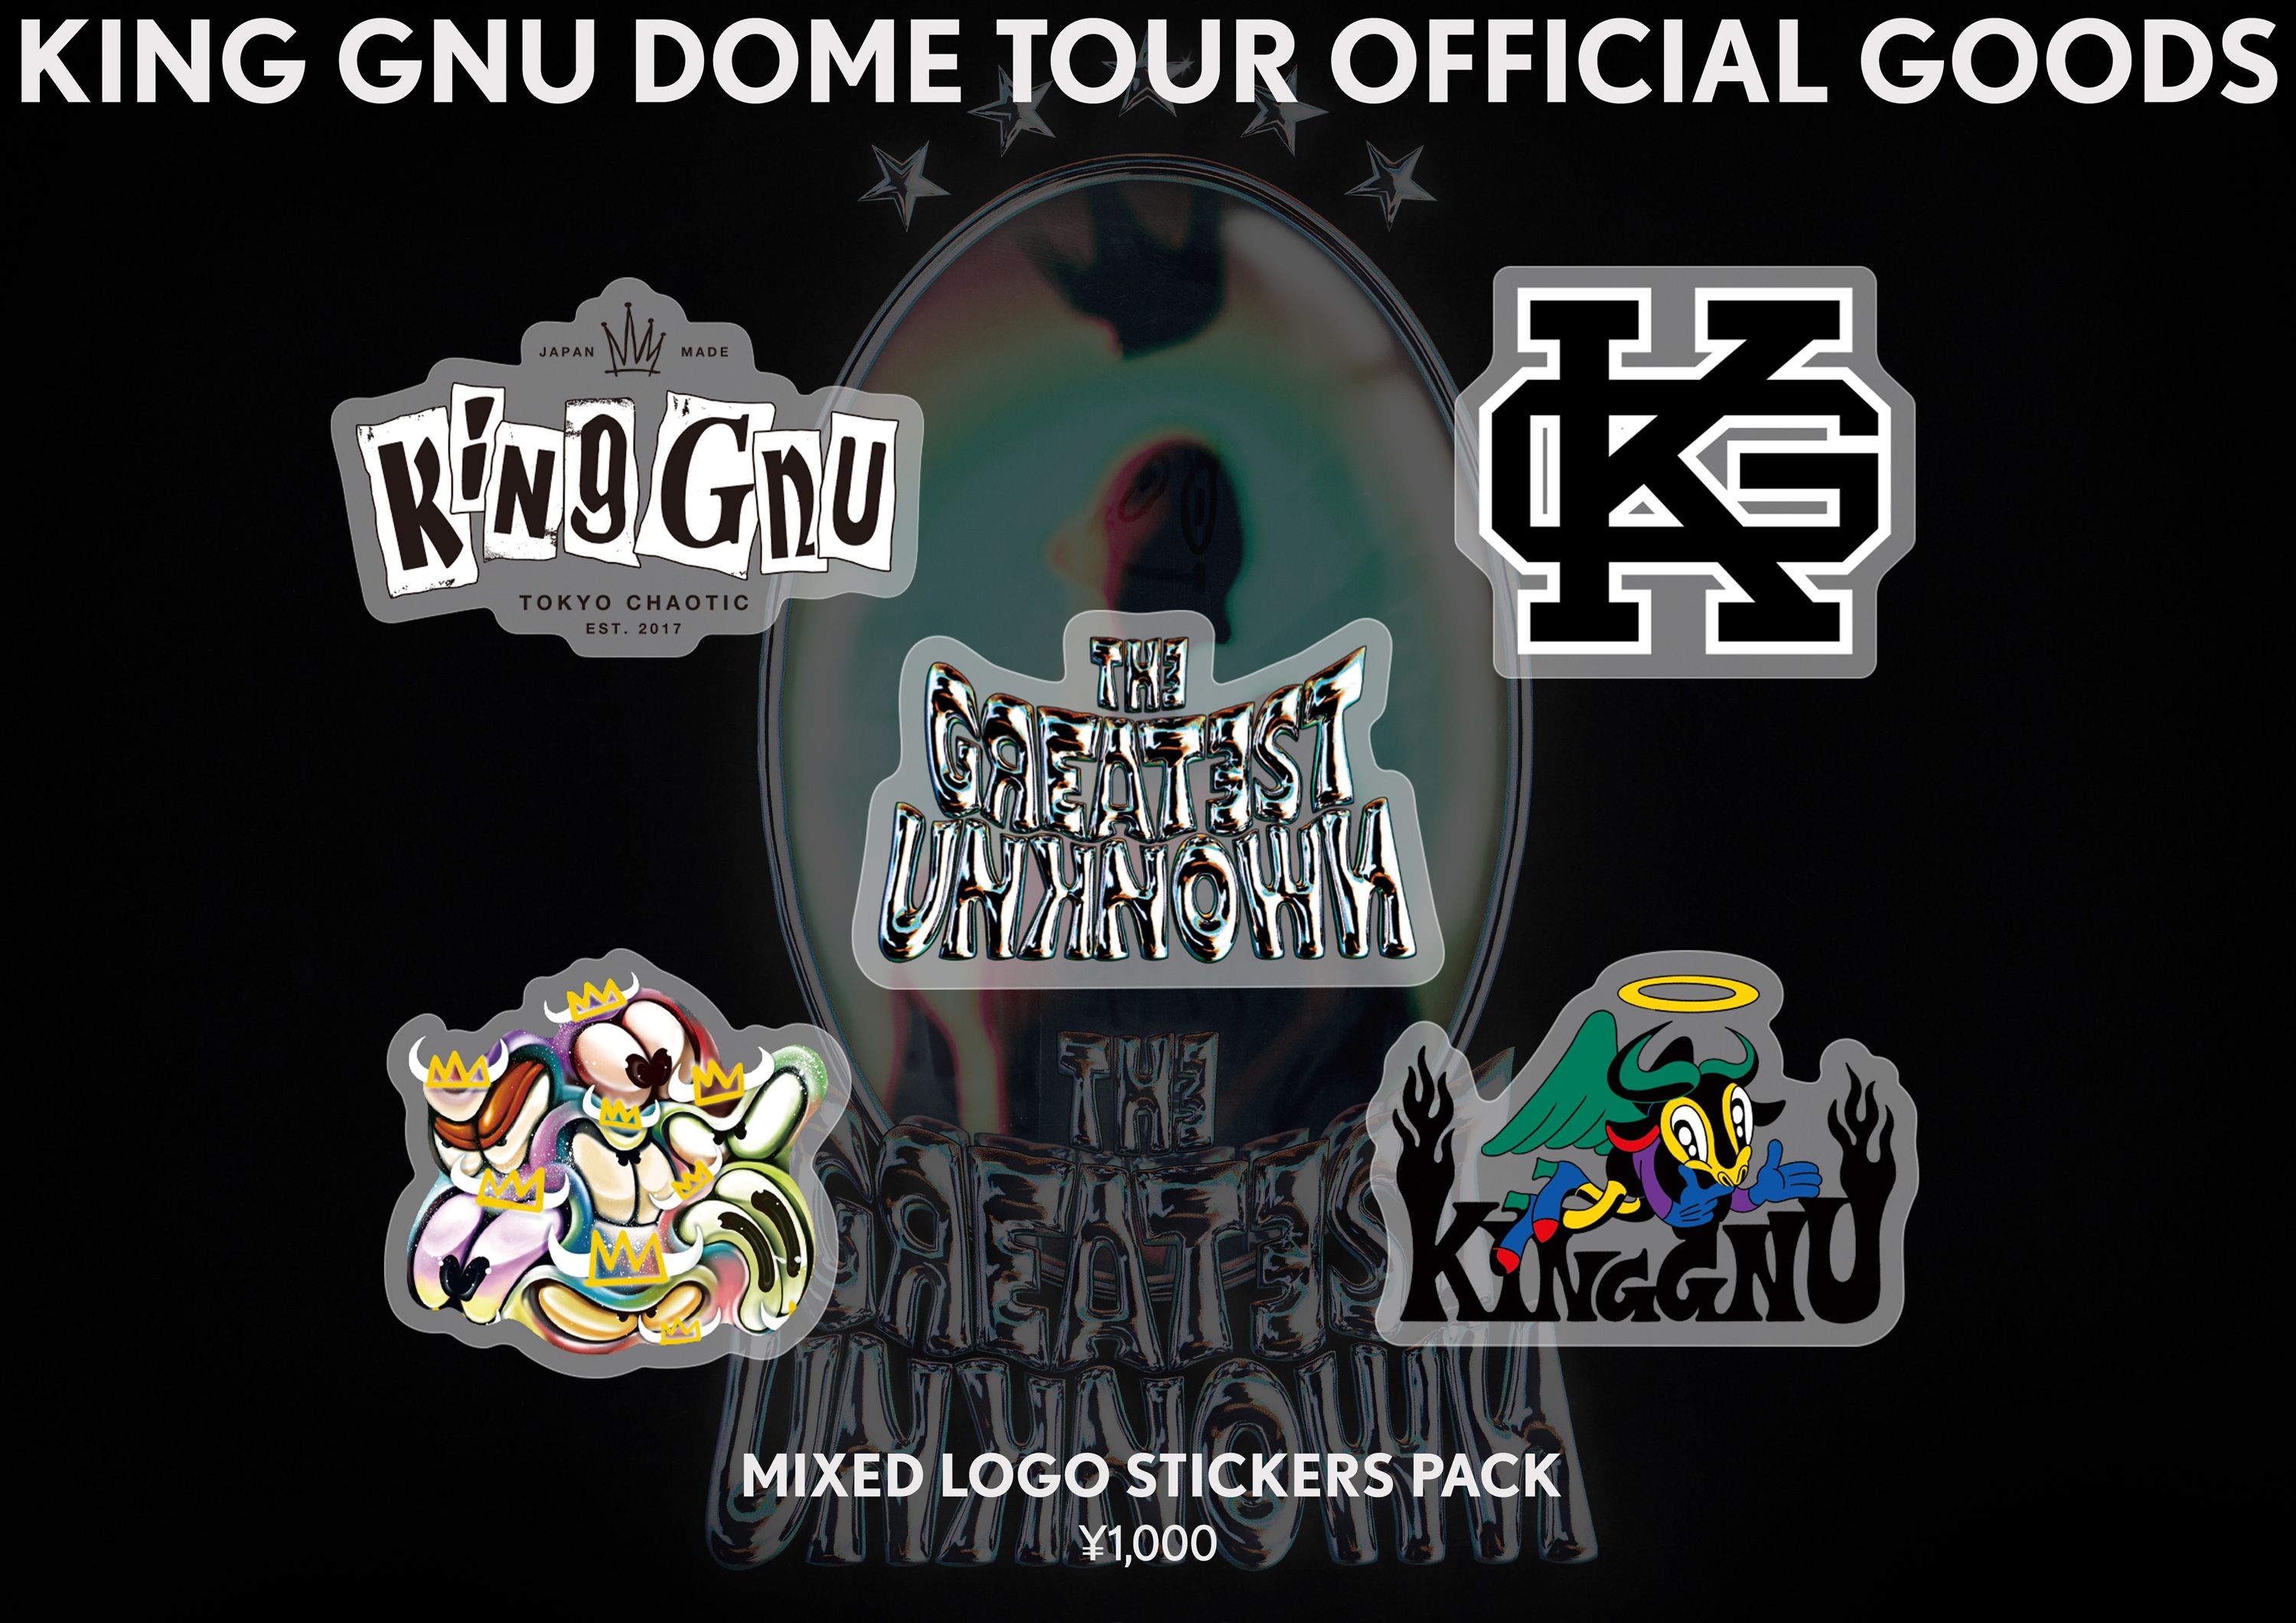 Goods】King Gnu Dome Tour「THE GREATEST UNKNOWN」第1弾オフィシャル 